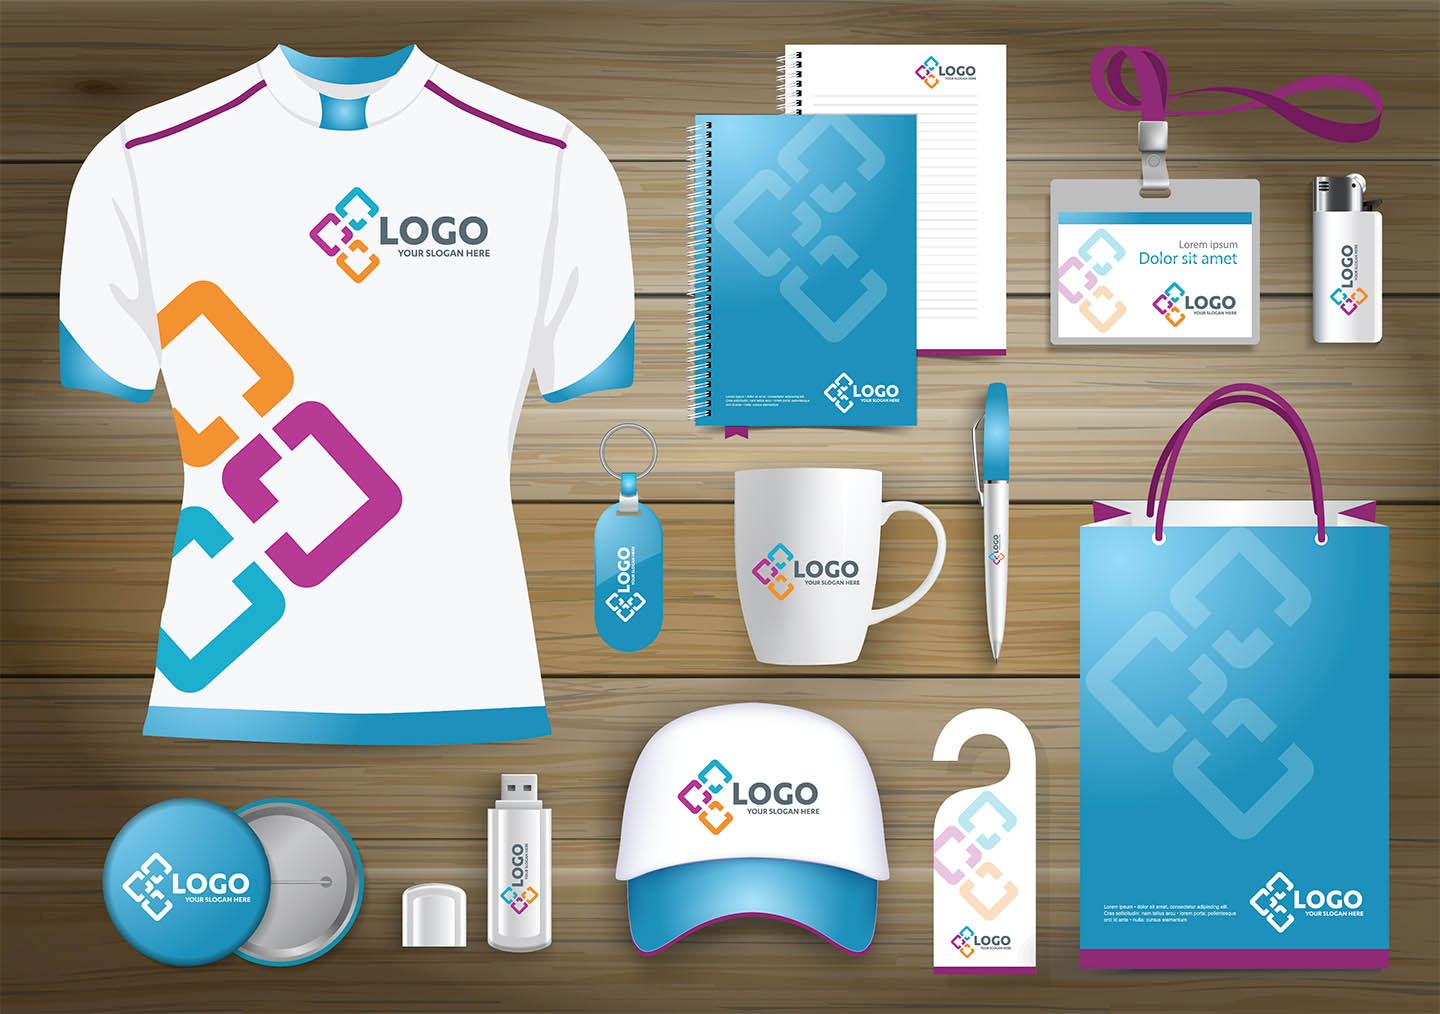 Assorted promotional items in 1 image